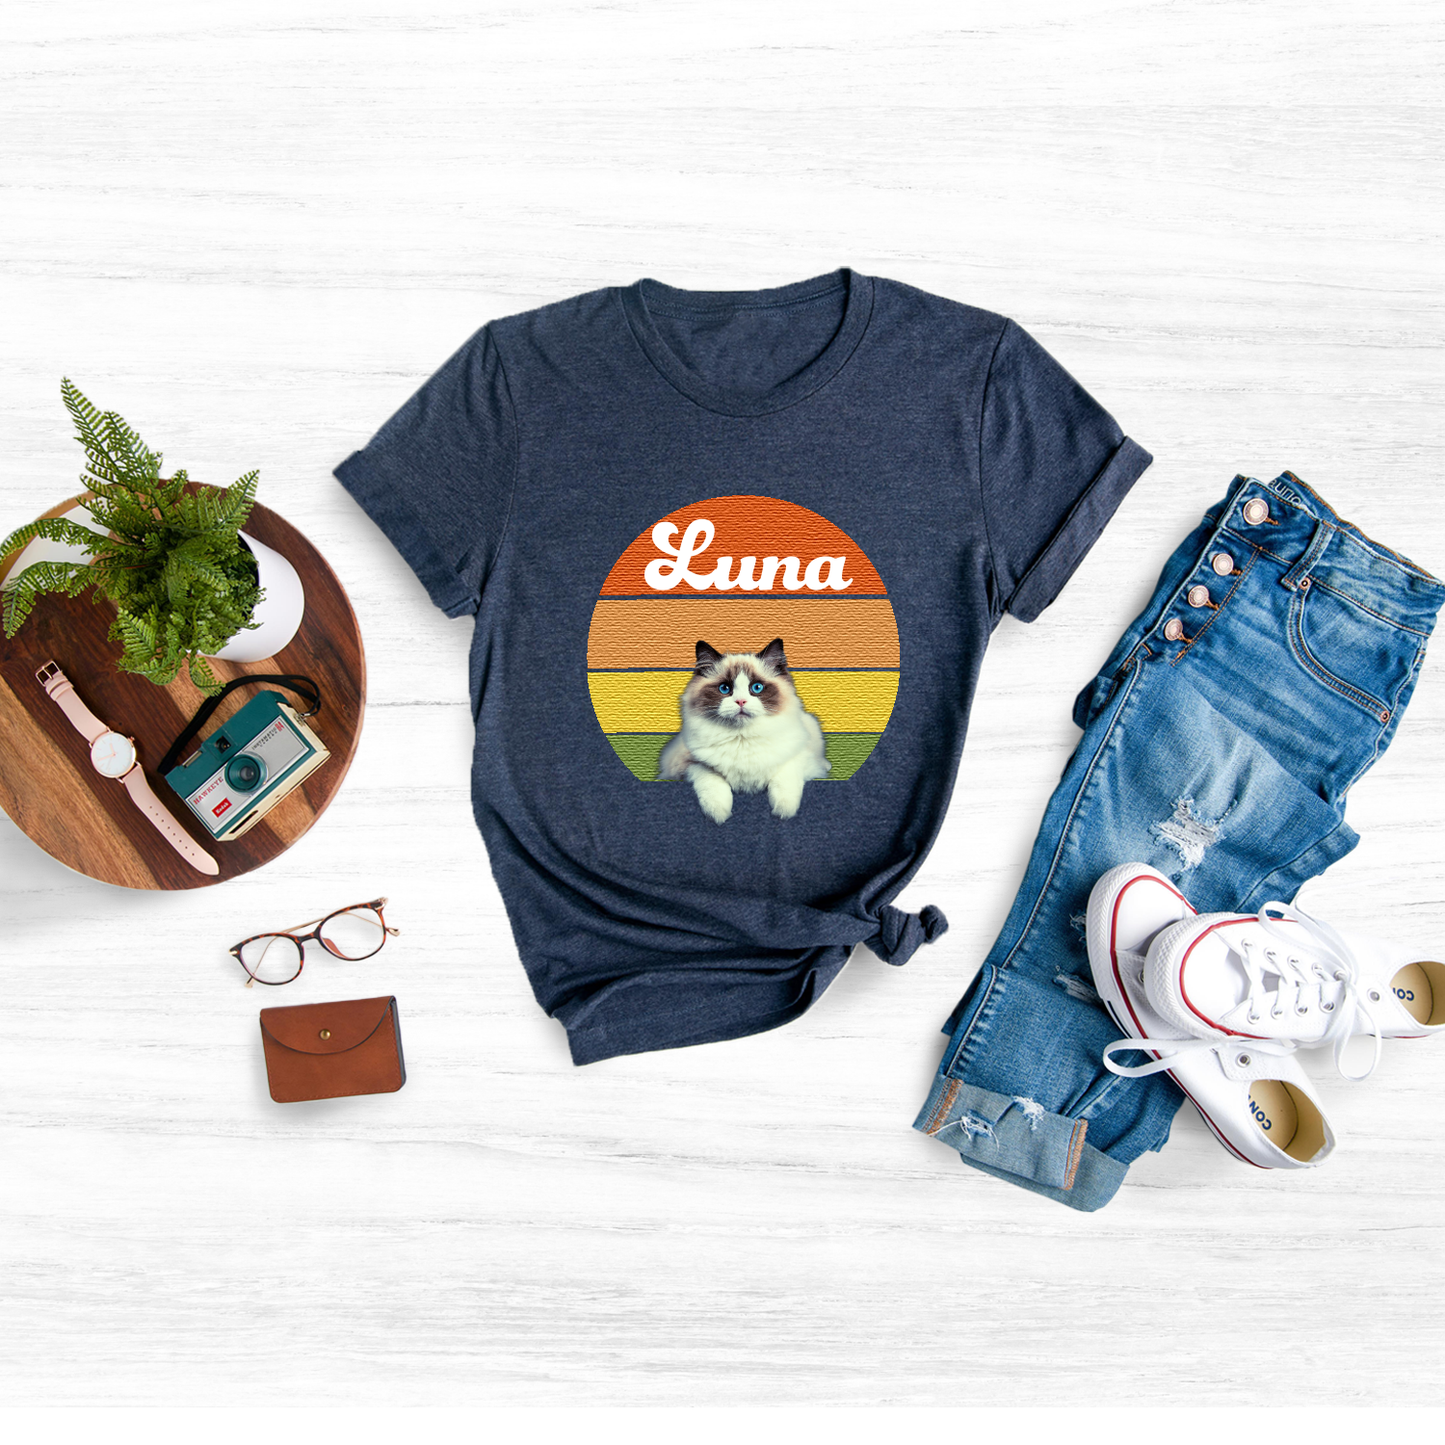 Create a one-of-a-kind vintage cat shirt featuring your cat's name, photo, or special message.